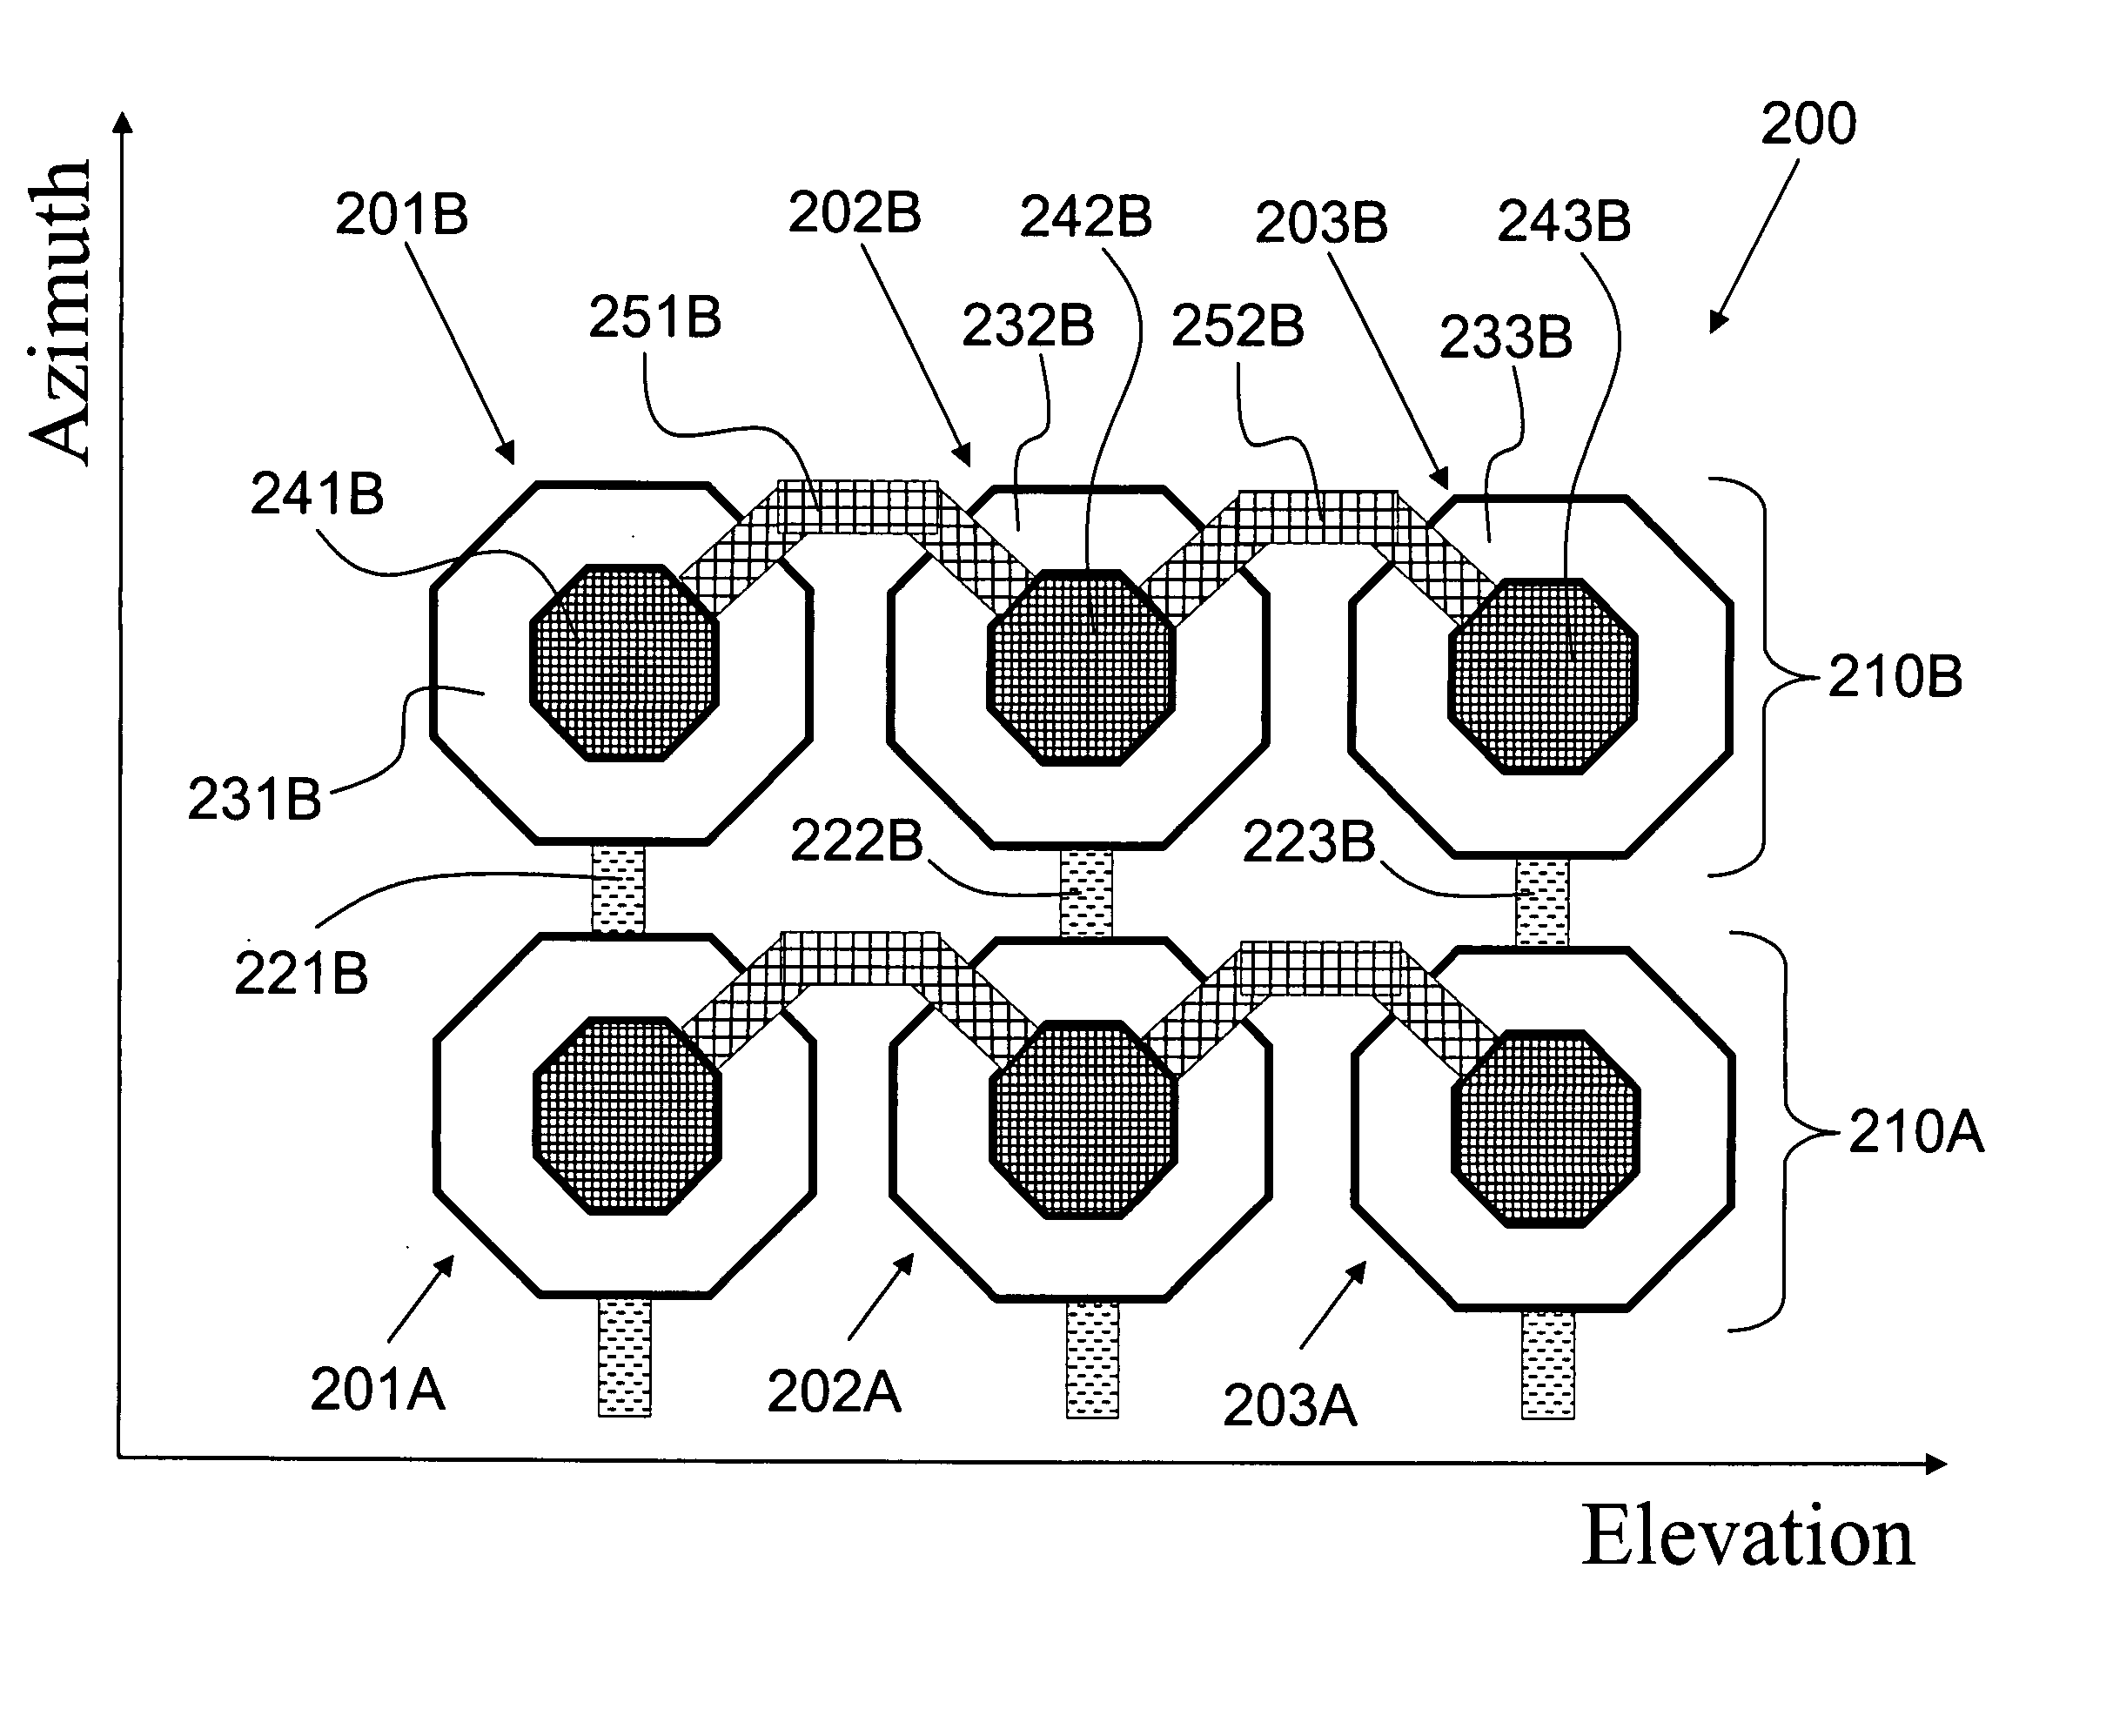 Microfabricated ultrasonic transducer array for 3-D imaging and method of operating the same